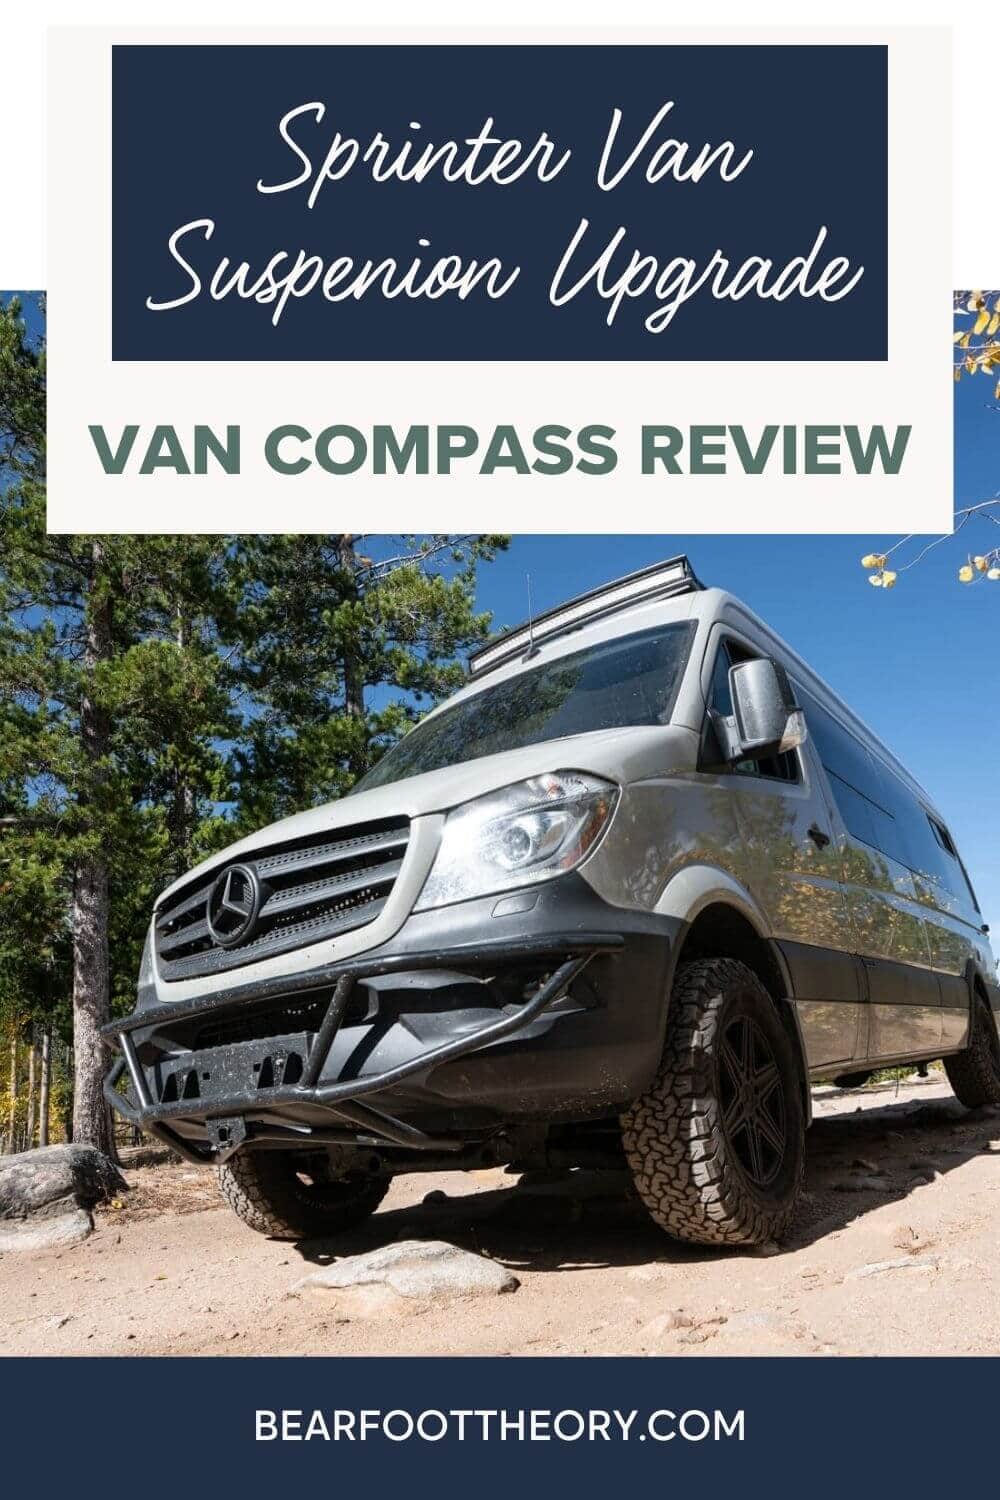 Are the Van Compass Sprinter suspension upgrades worth it? Read my Van Compass review & learn how the upgrades have affected my ride.